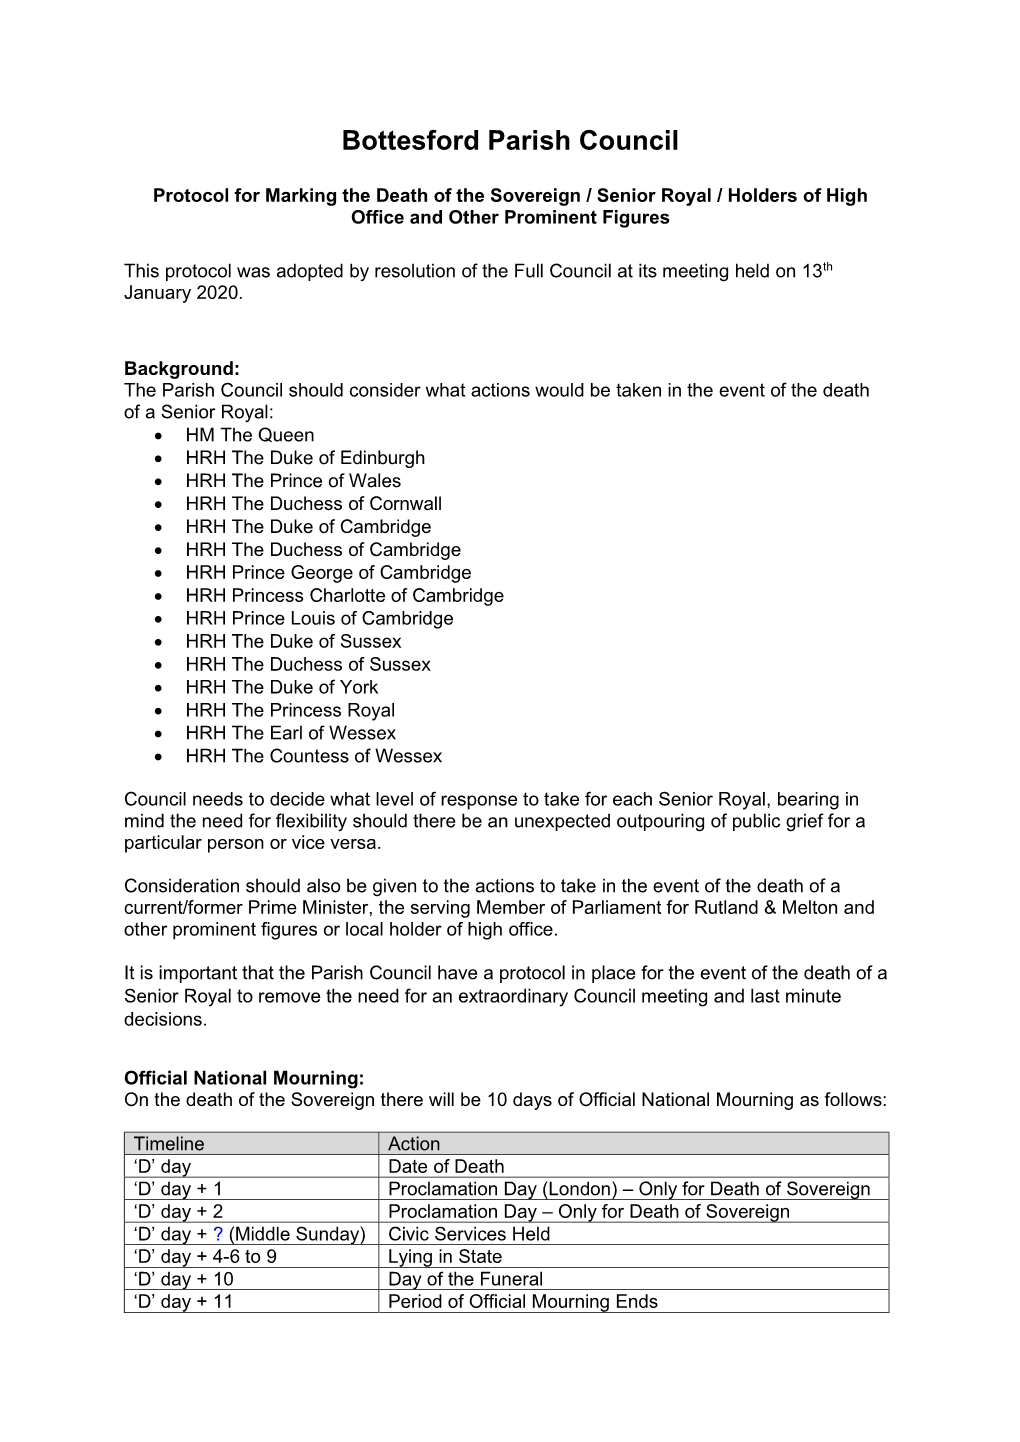 Protocol for Marking the Death of Sovereign/Senior Royal/Holder Of